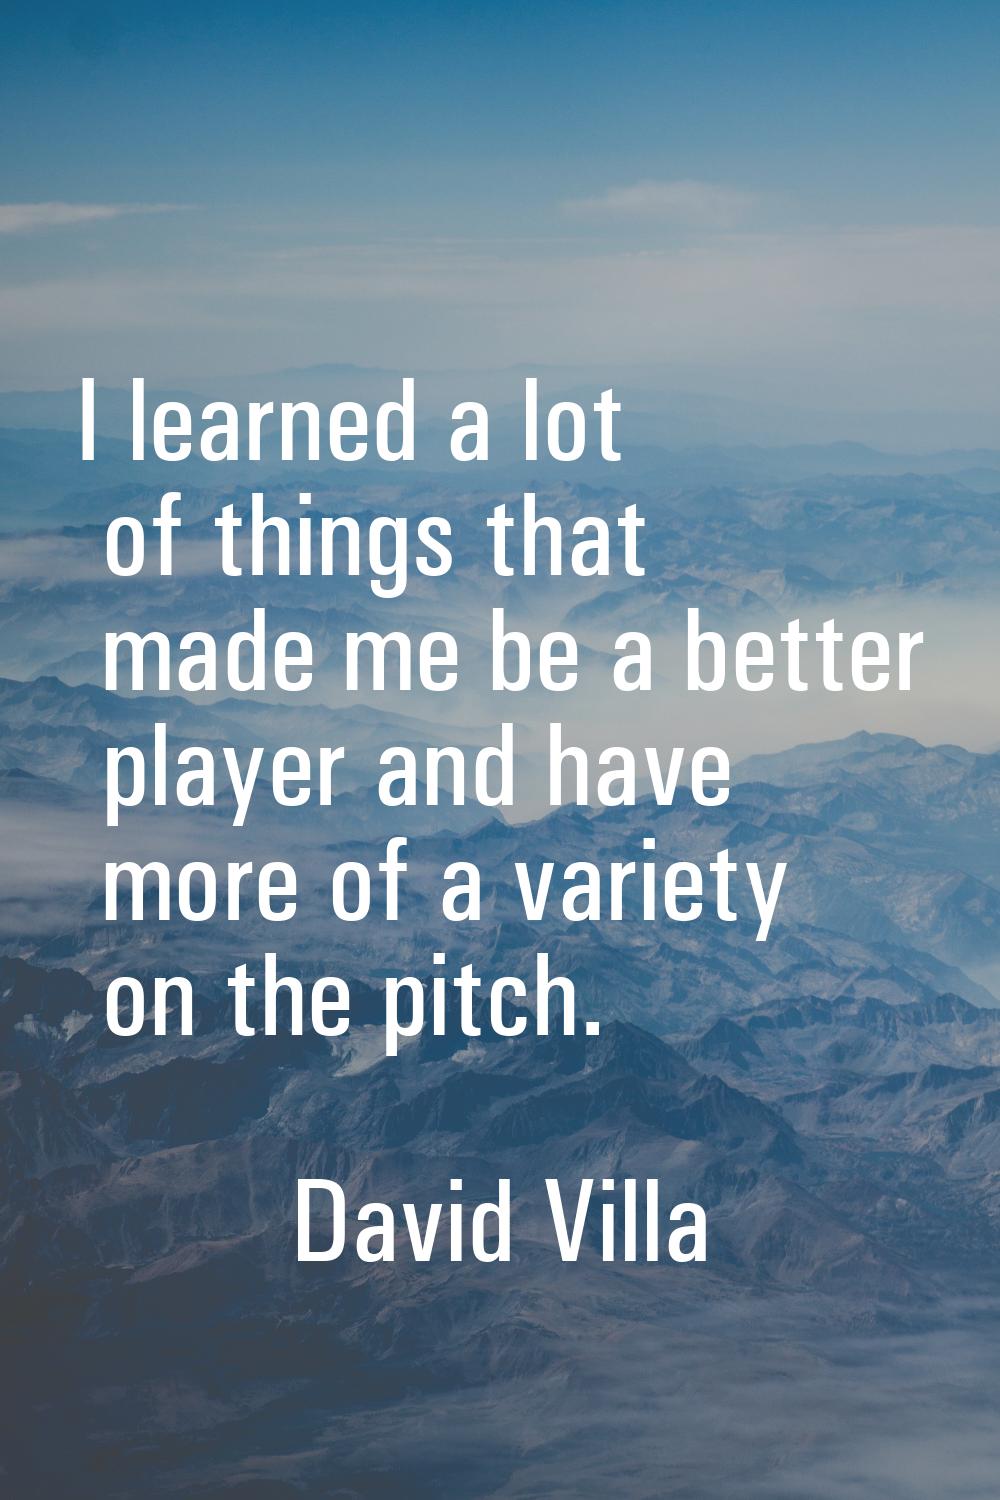 I learned a lot of things that made me be a better player and have more of a variety on the pitch.